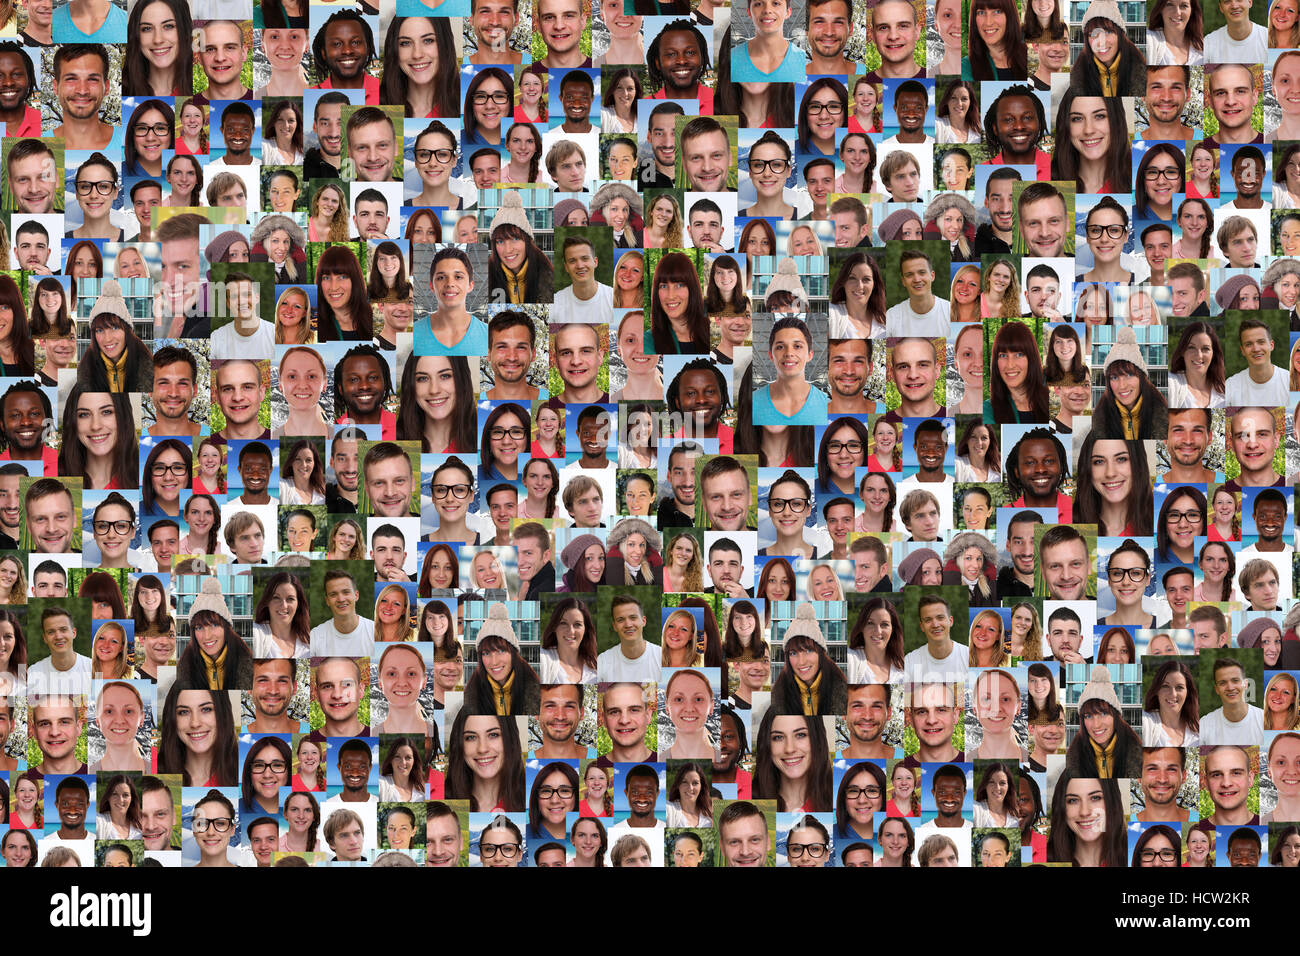 Young people background collage large group of smiling faces social media Stock Photo